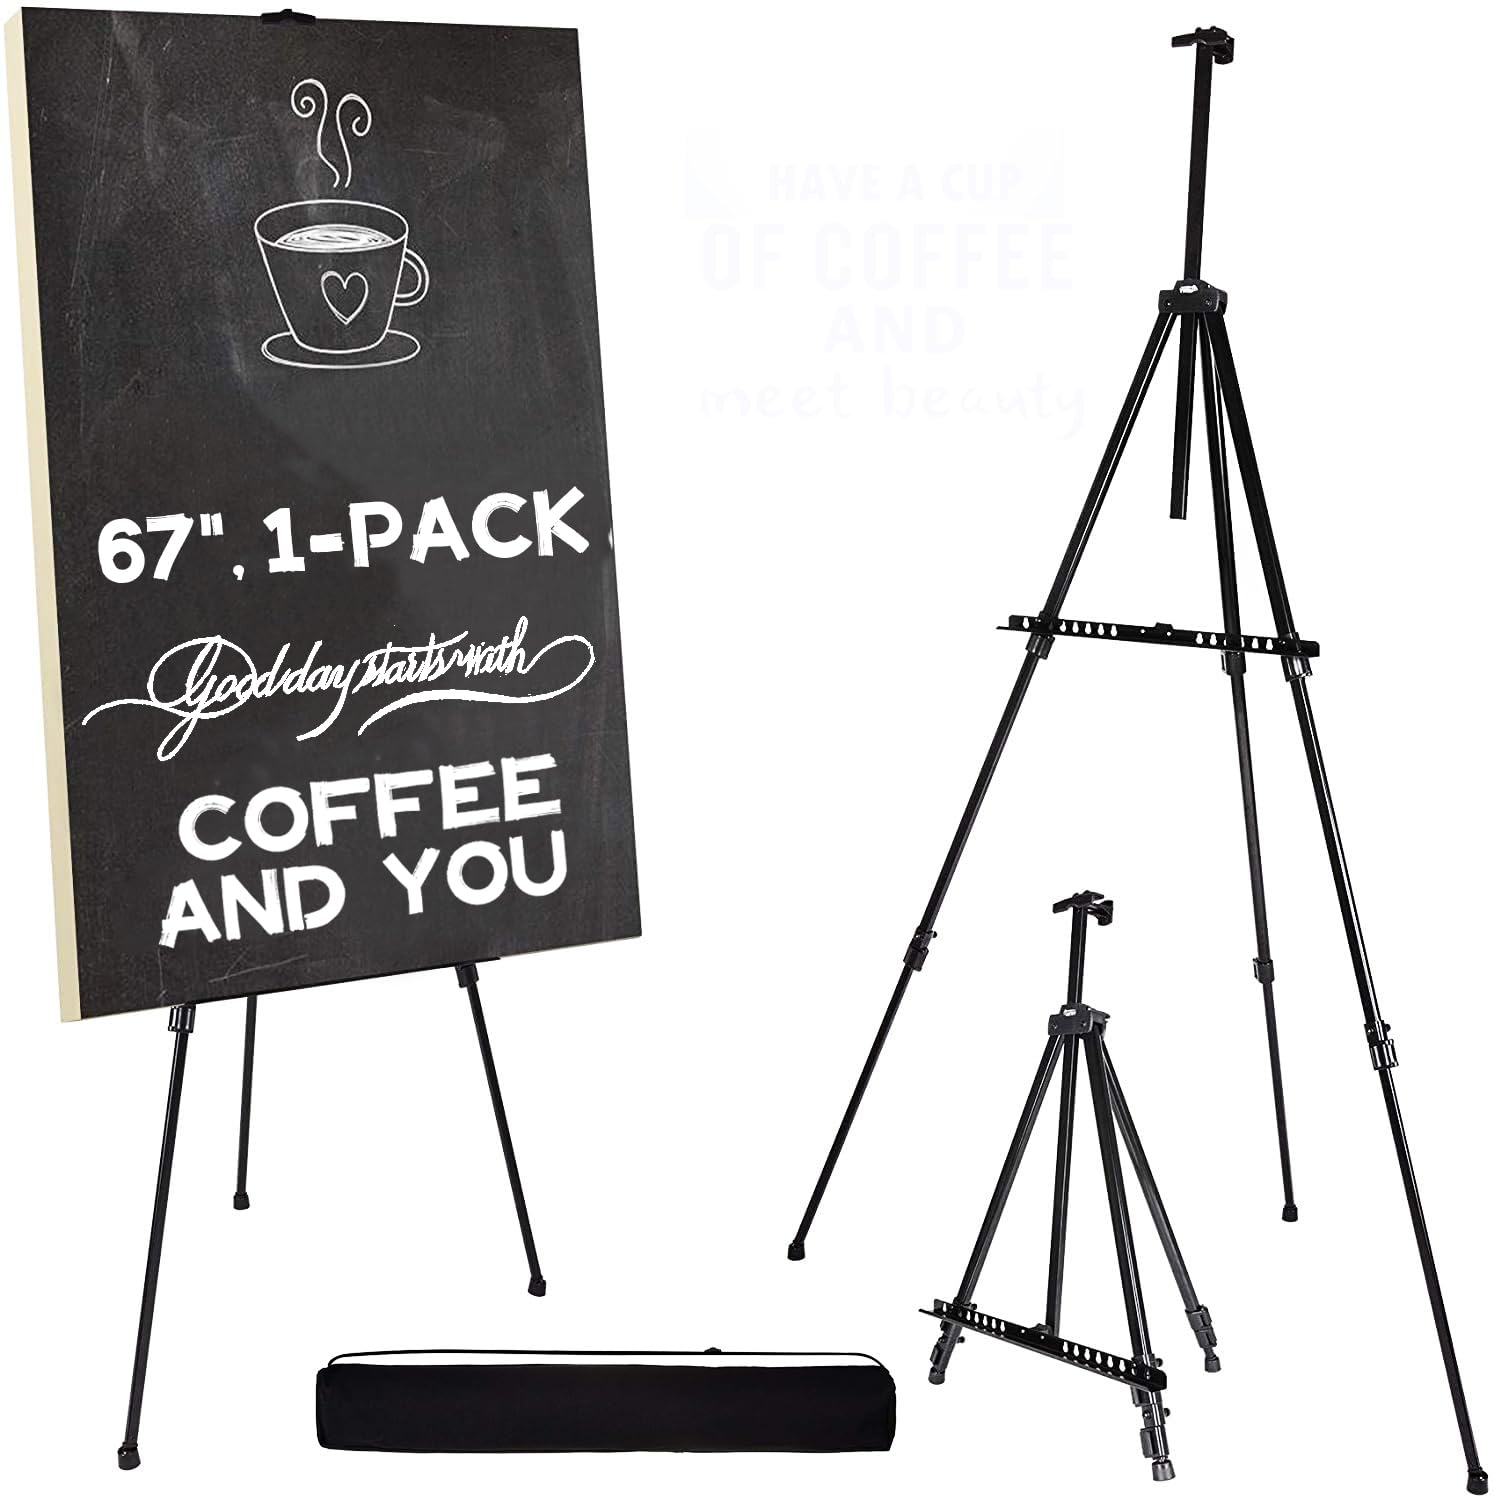 Artify 67 Inches Double Tier Easel Stand, Adjustable Height from 22-67”, 3 in 1, for Painting and Display with a Carrying Bag, 1PACK